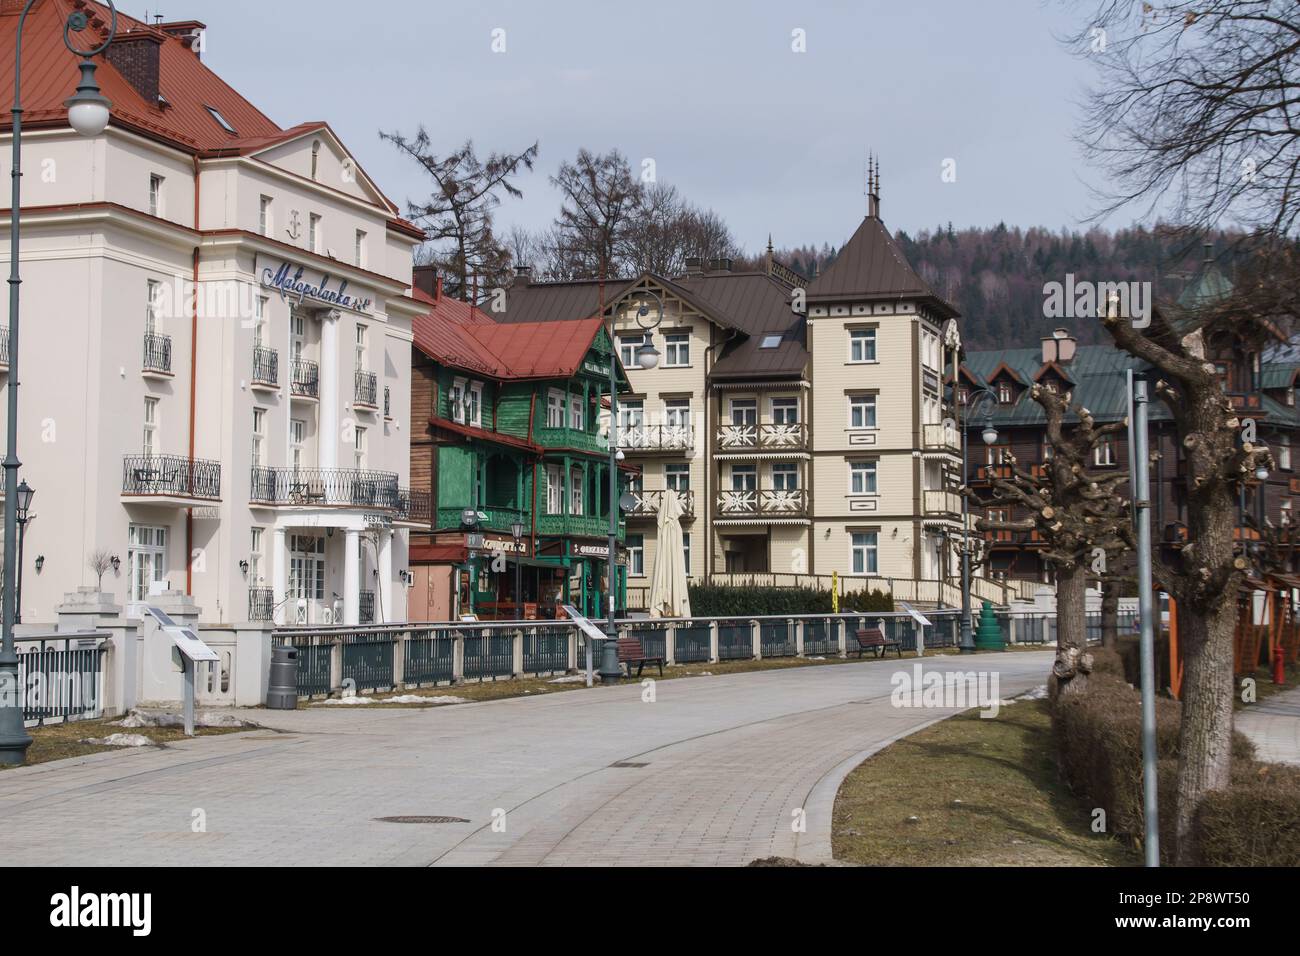 architecture in Krynica Zdroj Poland old and new buildings Stock Photo